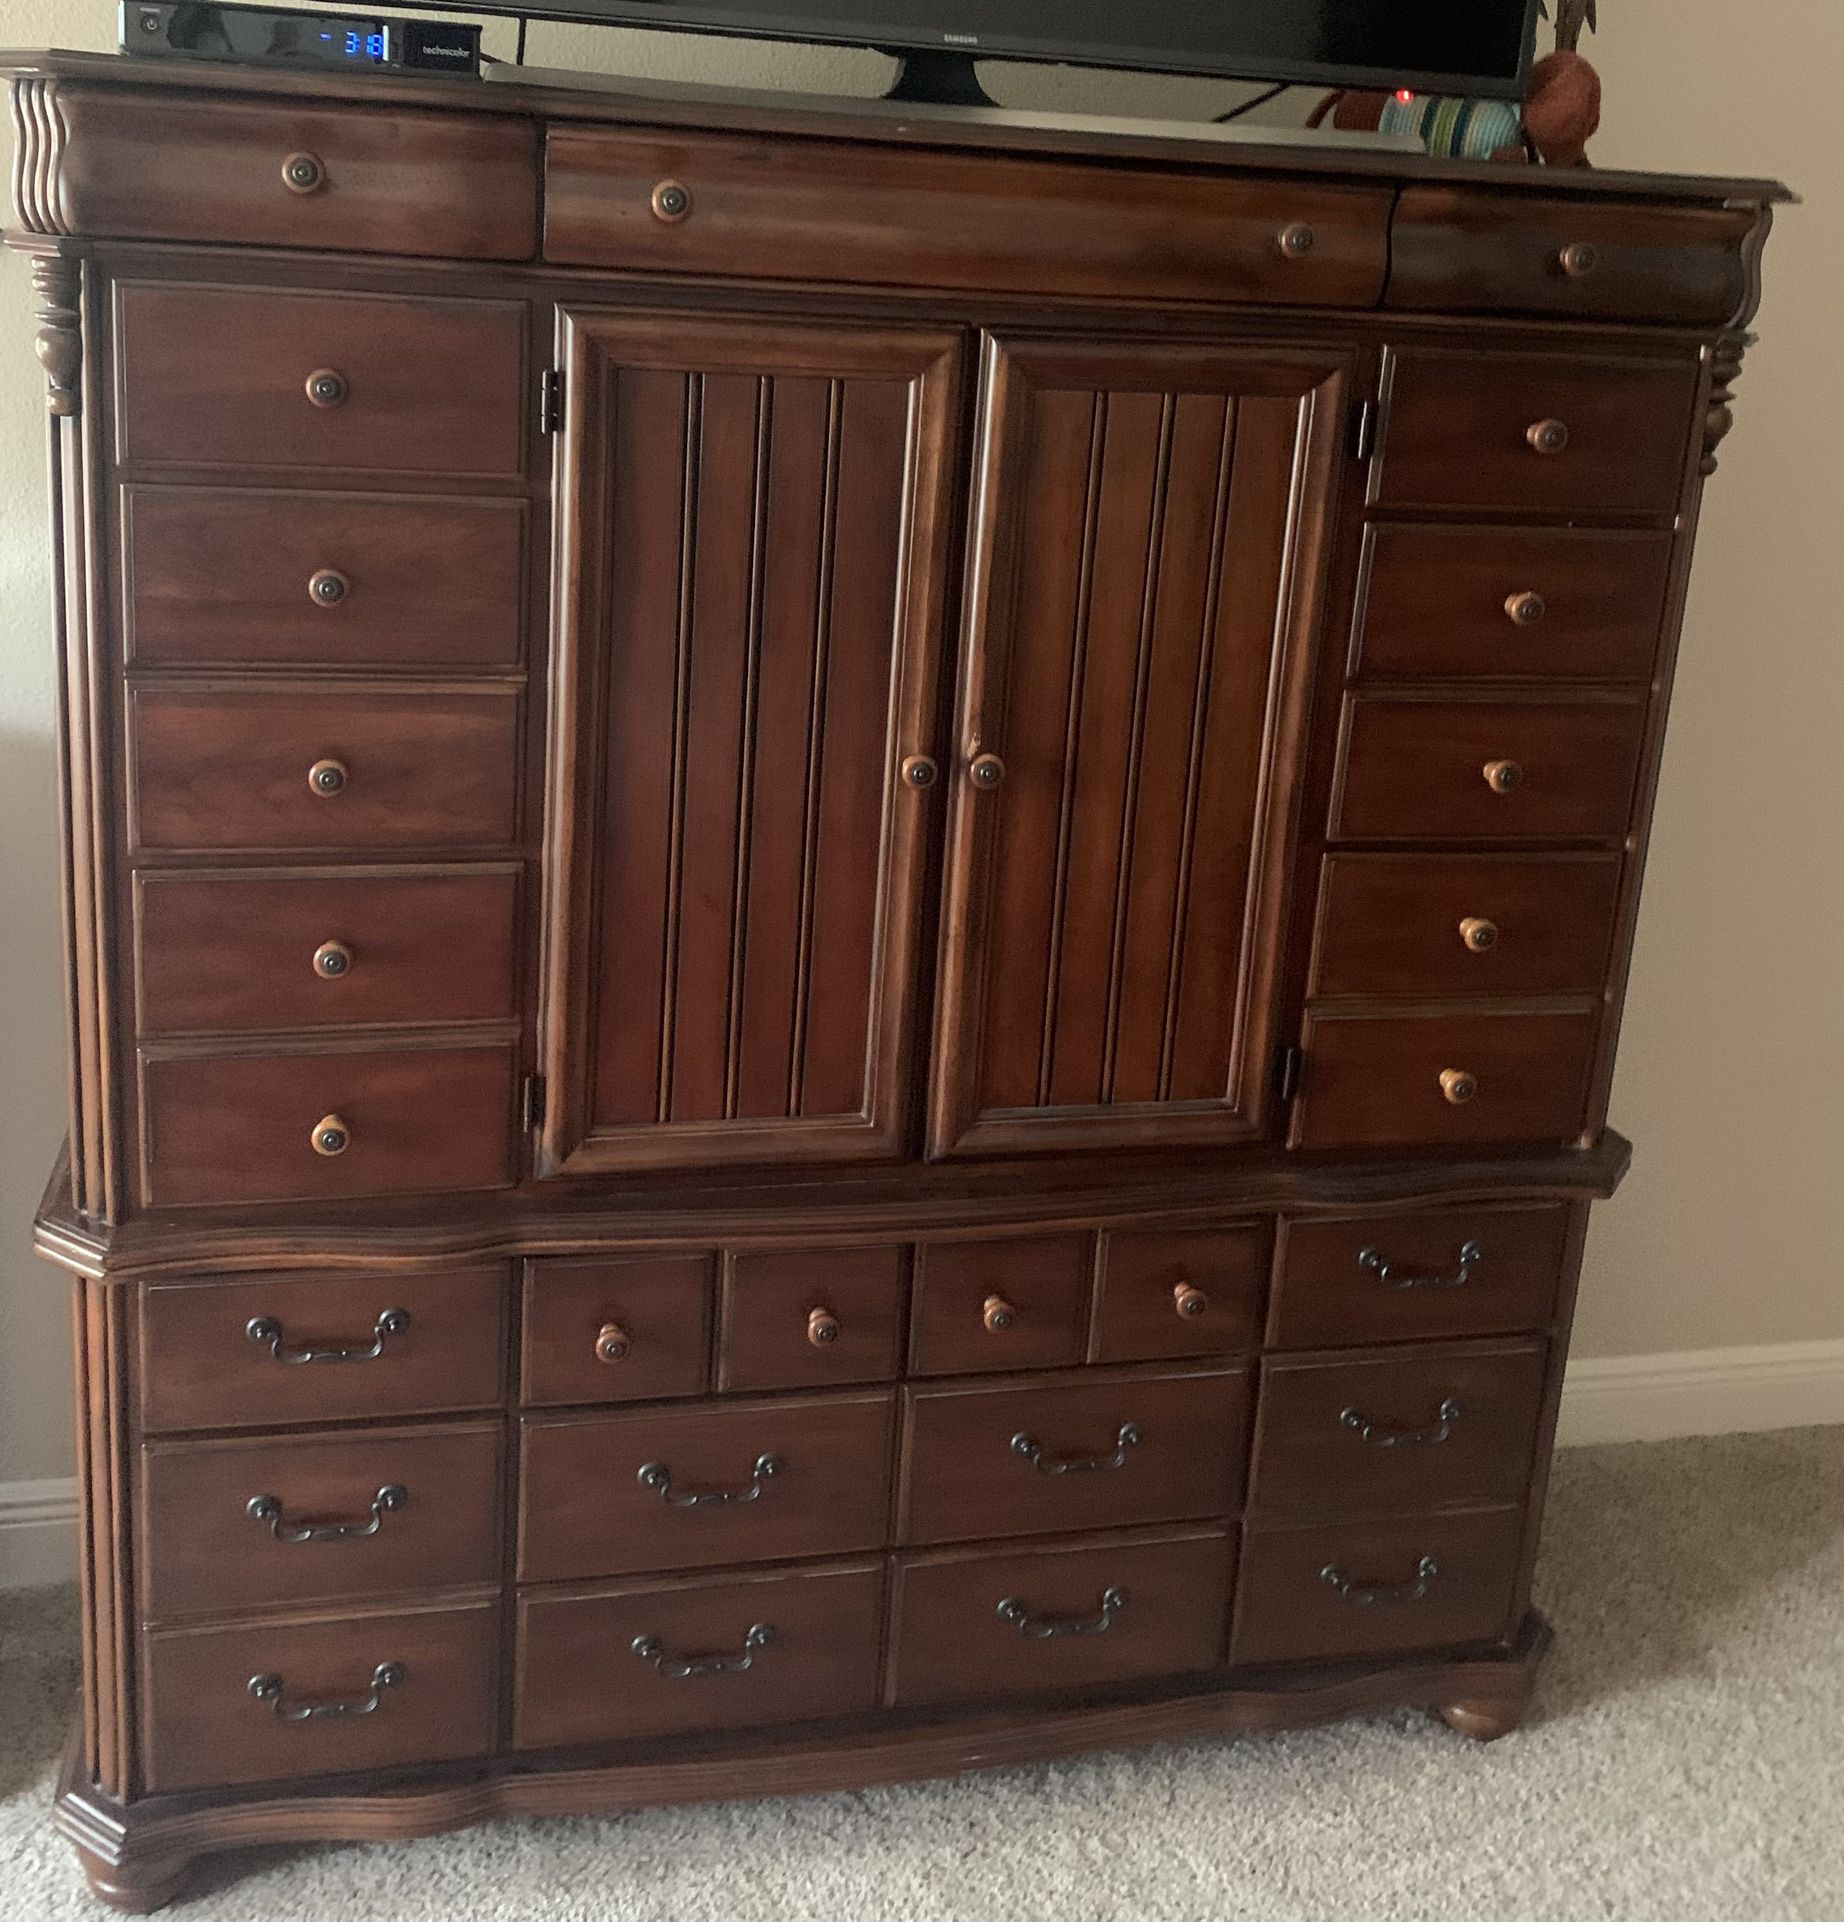 Tall Bedroom Dresser With Drawers